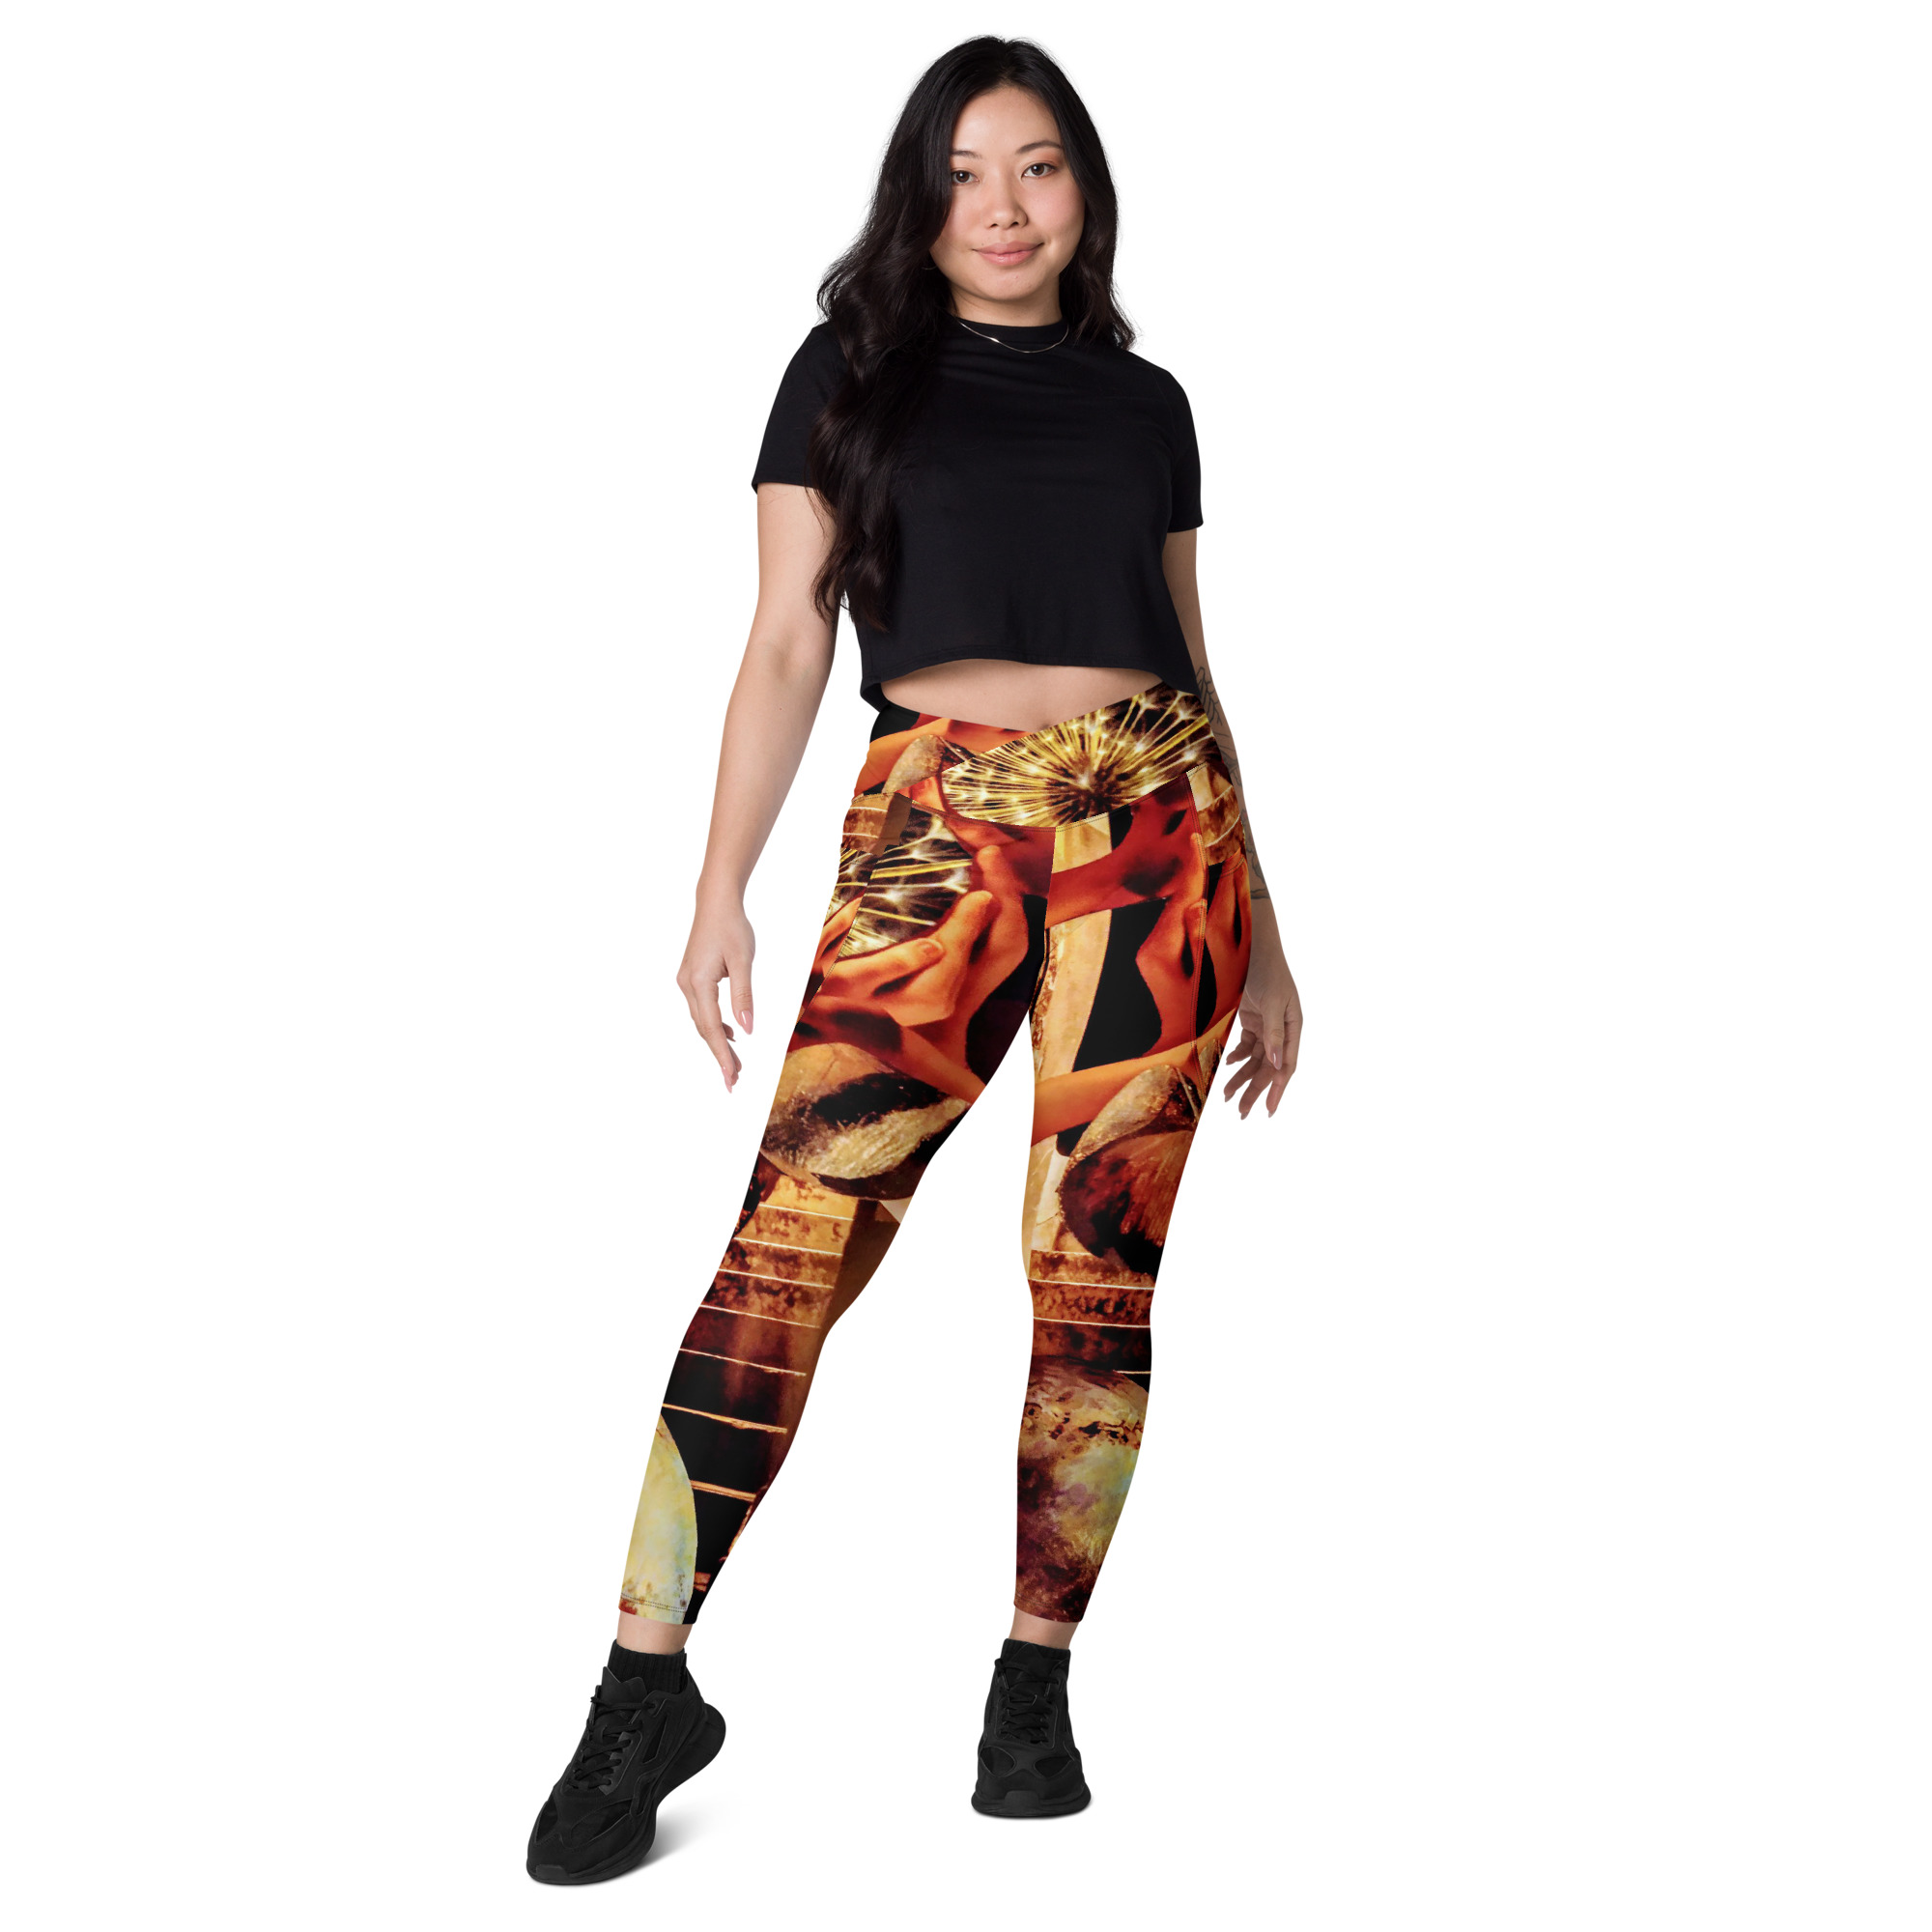 all-over-print-crossover-leggings-with-pockets-white-front-6339ff4598d71.jpg